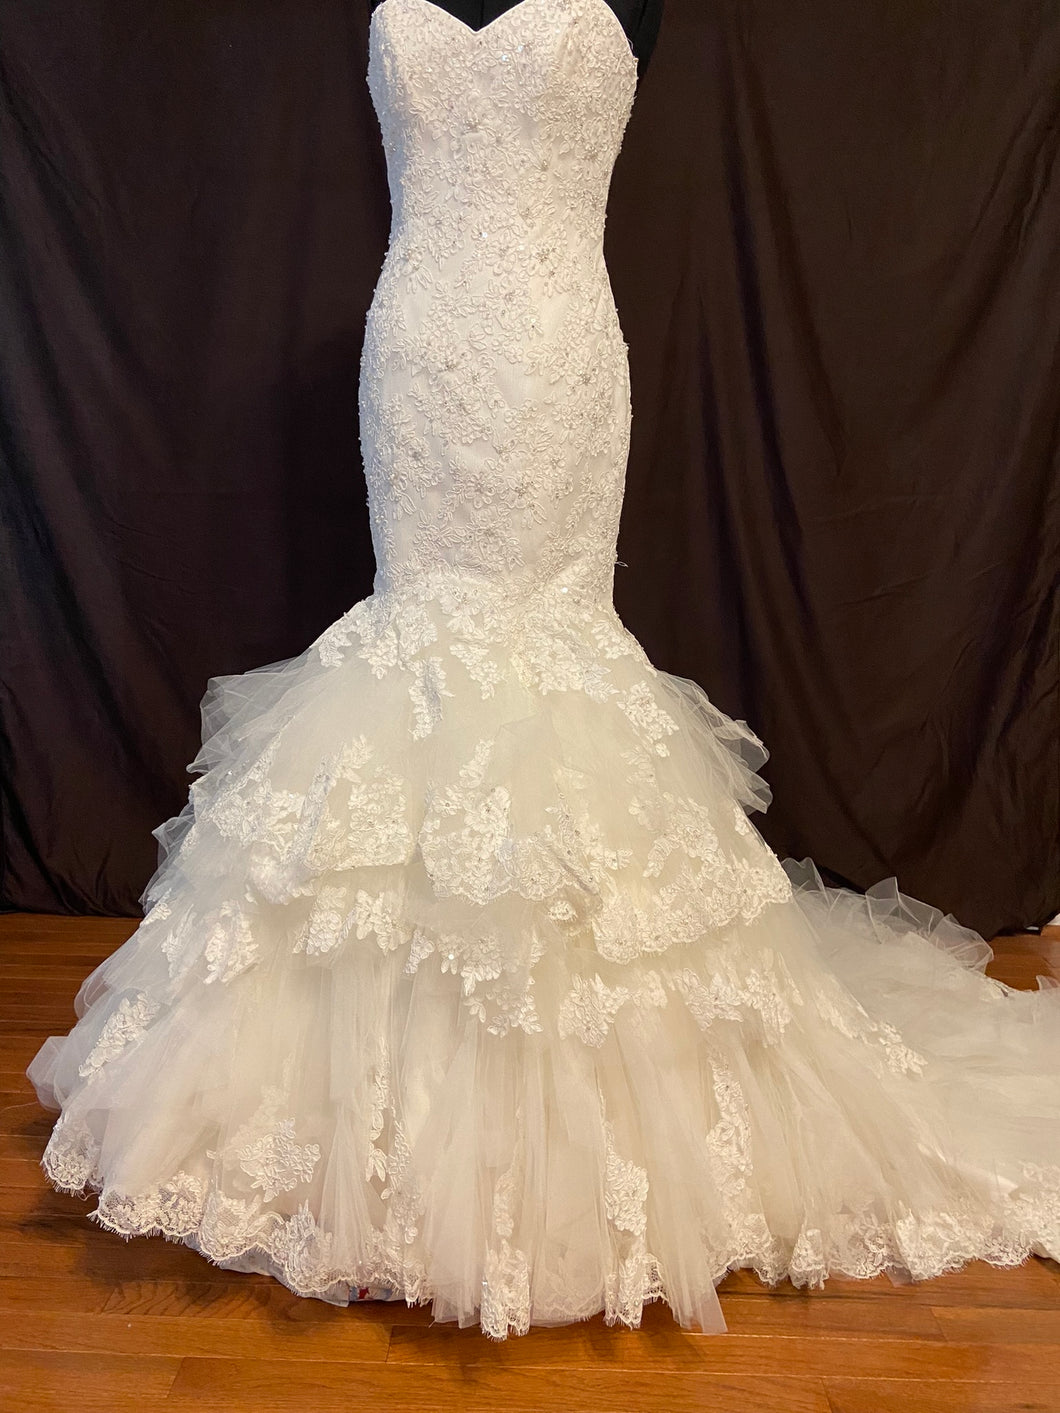 Maggie Sottero 'Fit and Flare' wedding dress size-10 NEW